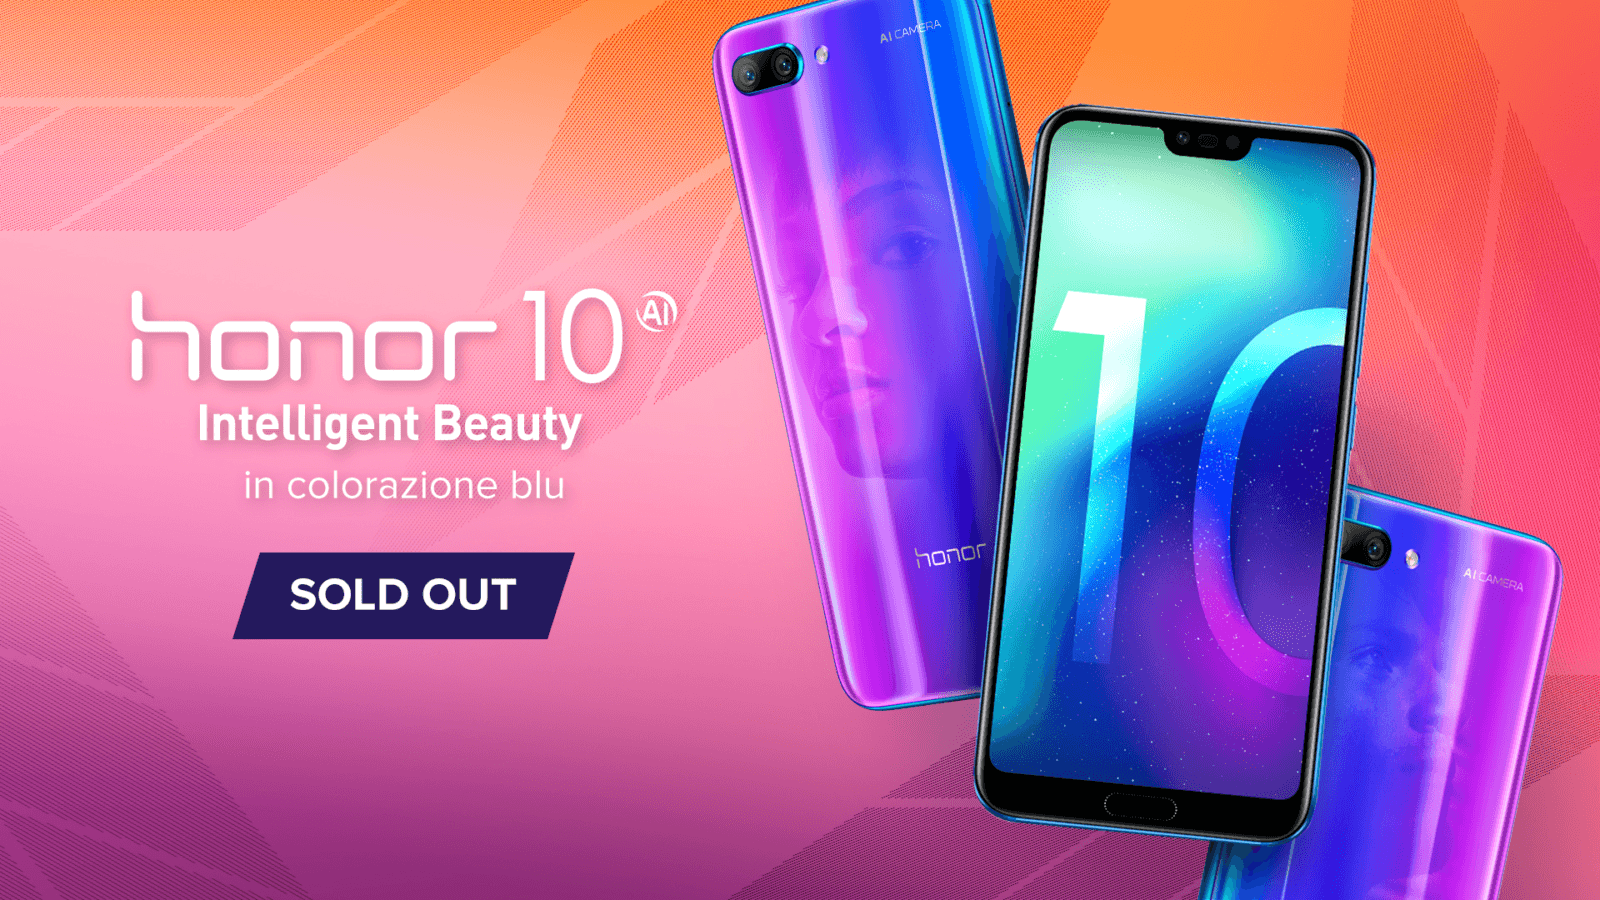 Honor 10 sold out